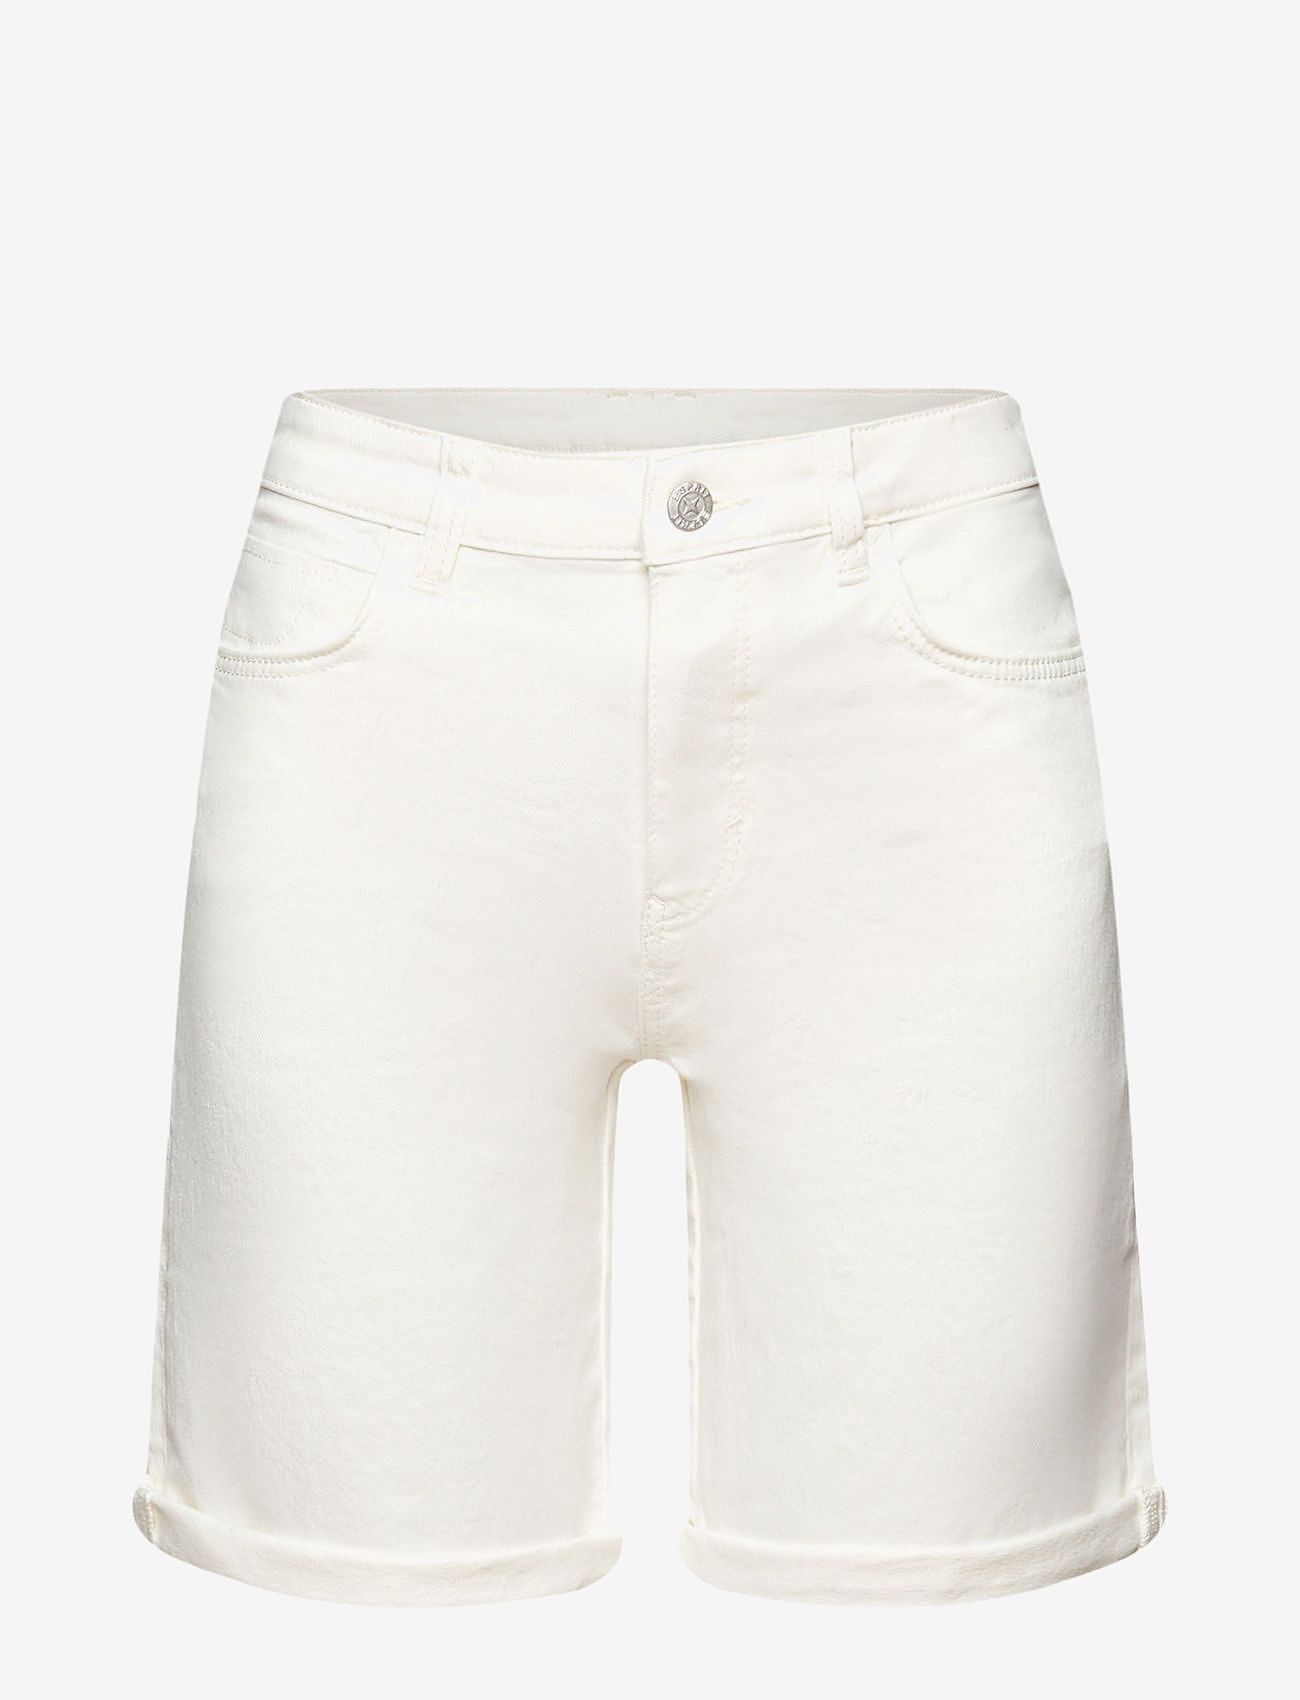 Esprit Casual - Cotton stretch shorts - jeansshorts - off white - 0